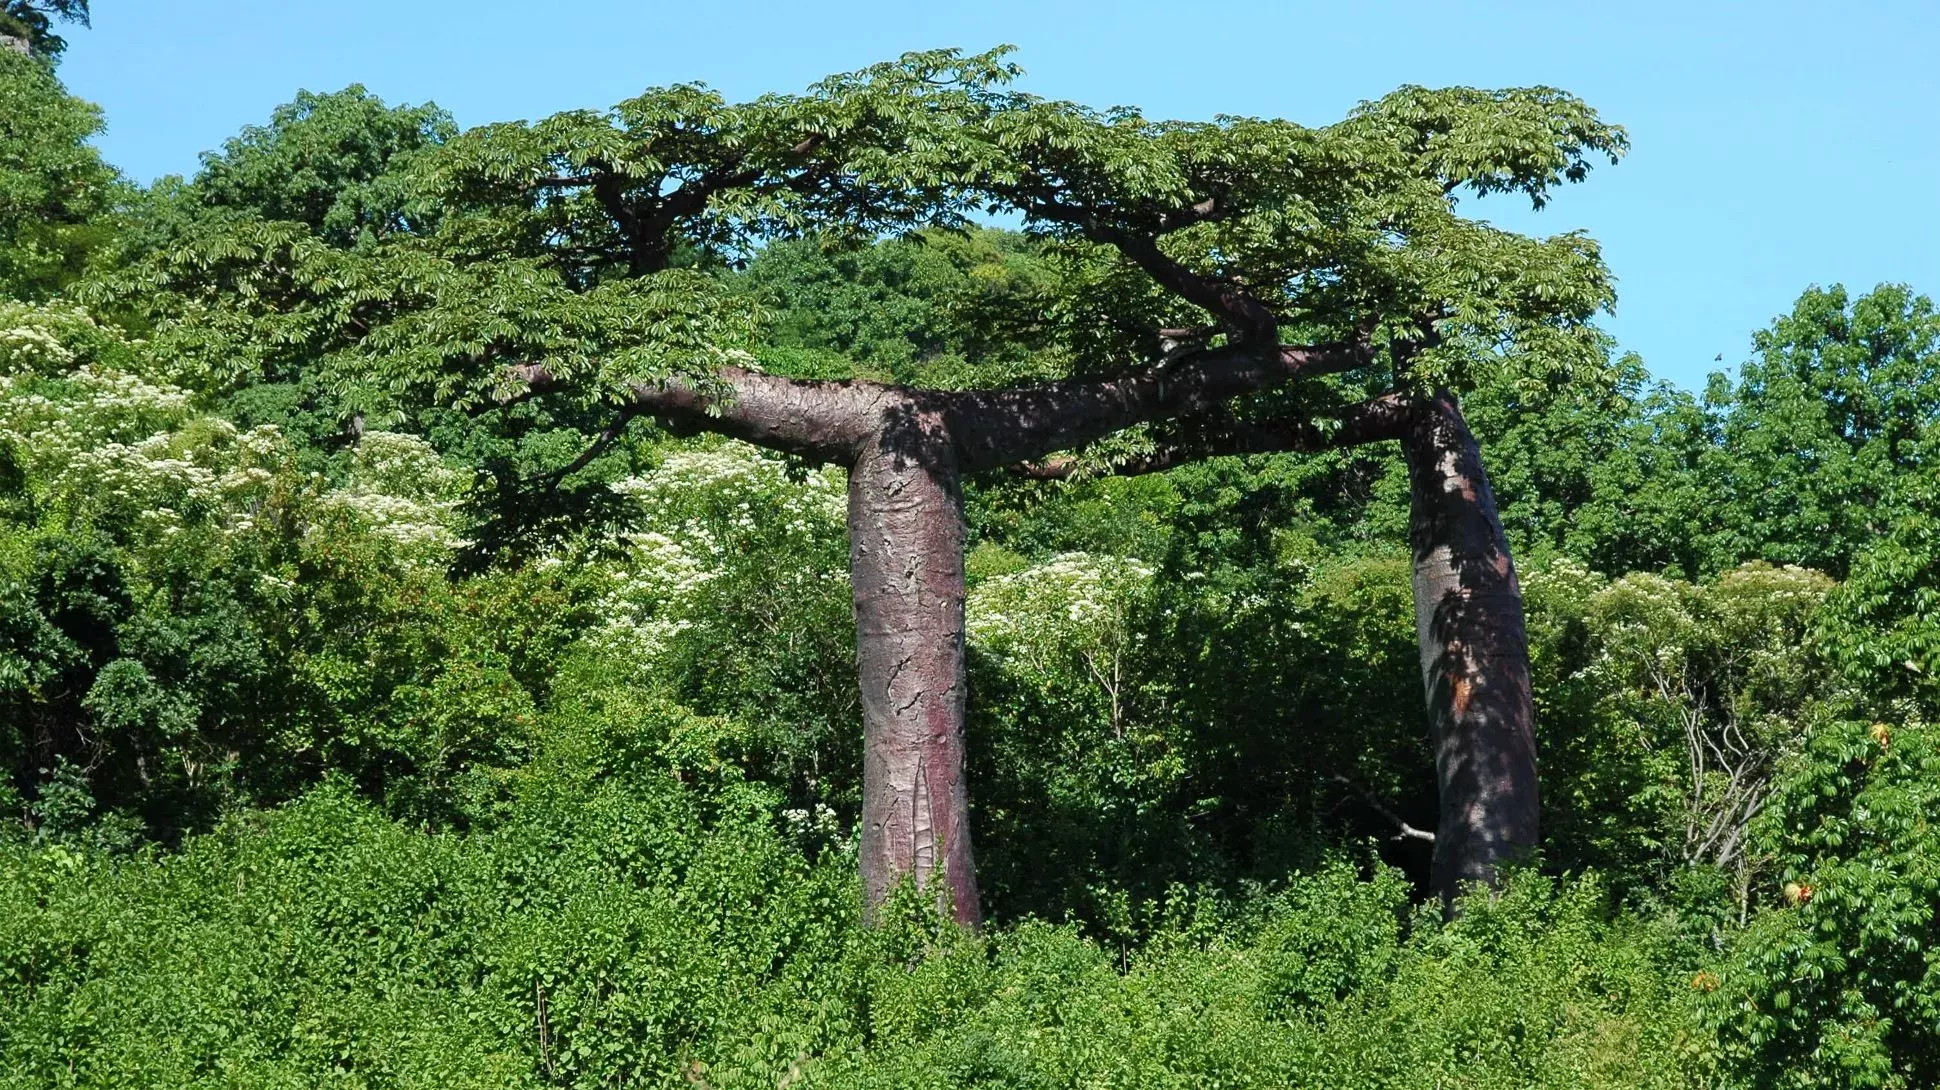 A large suarez baobab growing in a forest